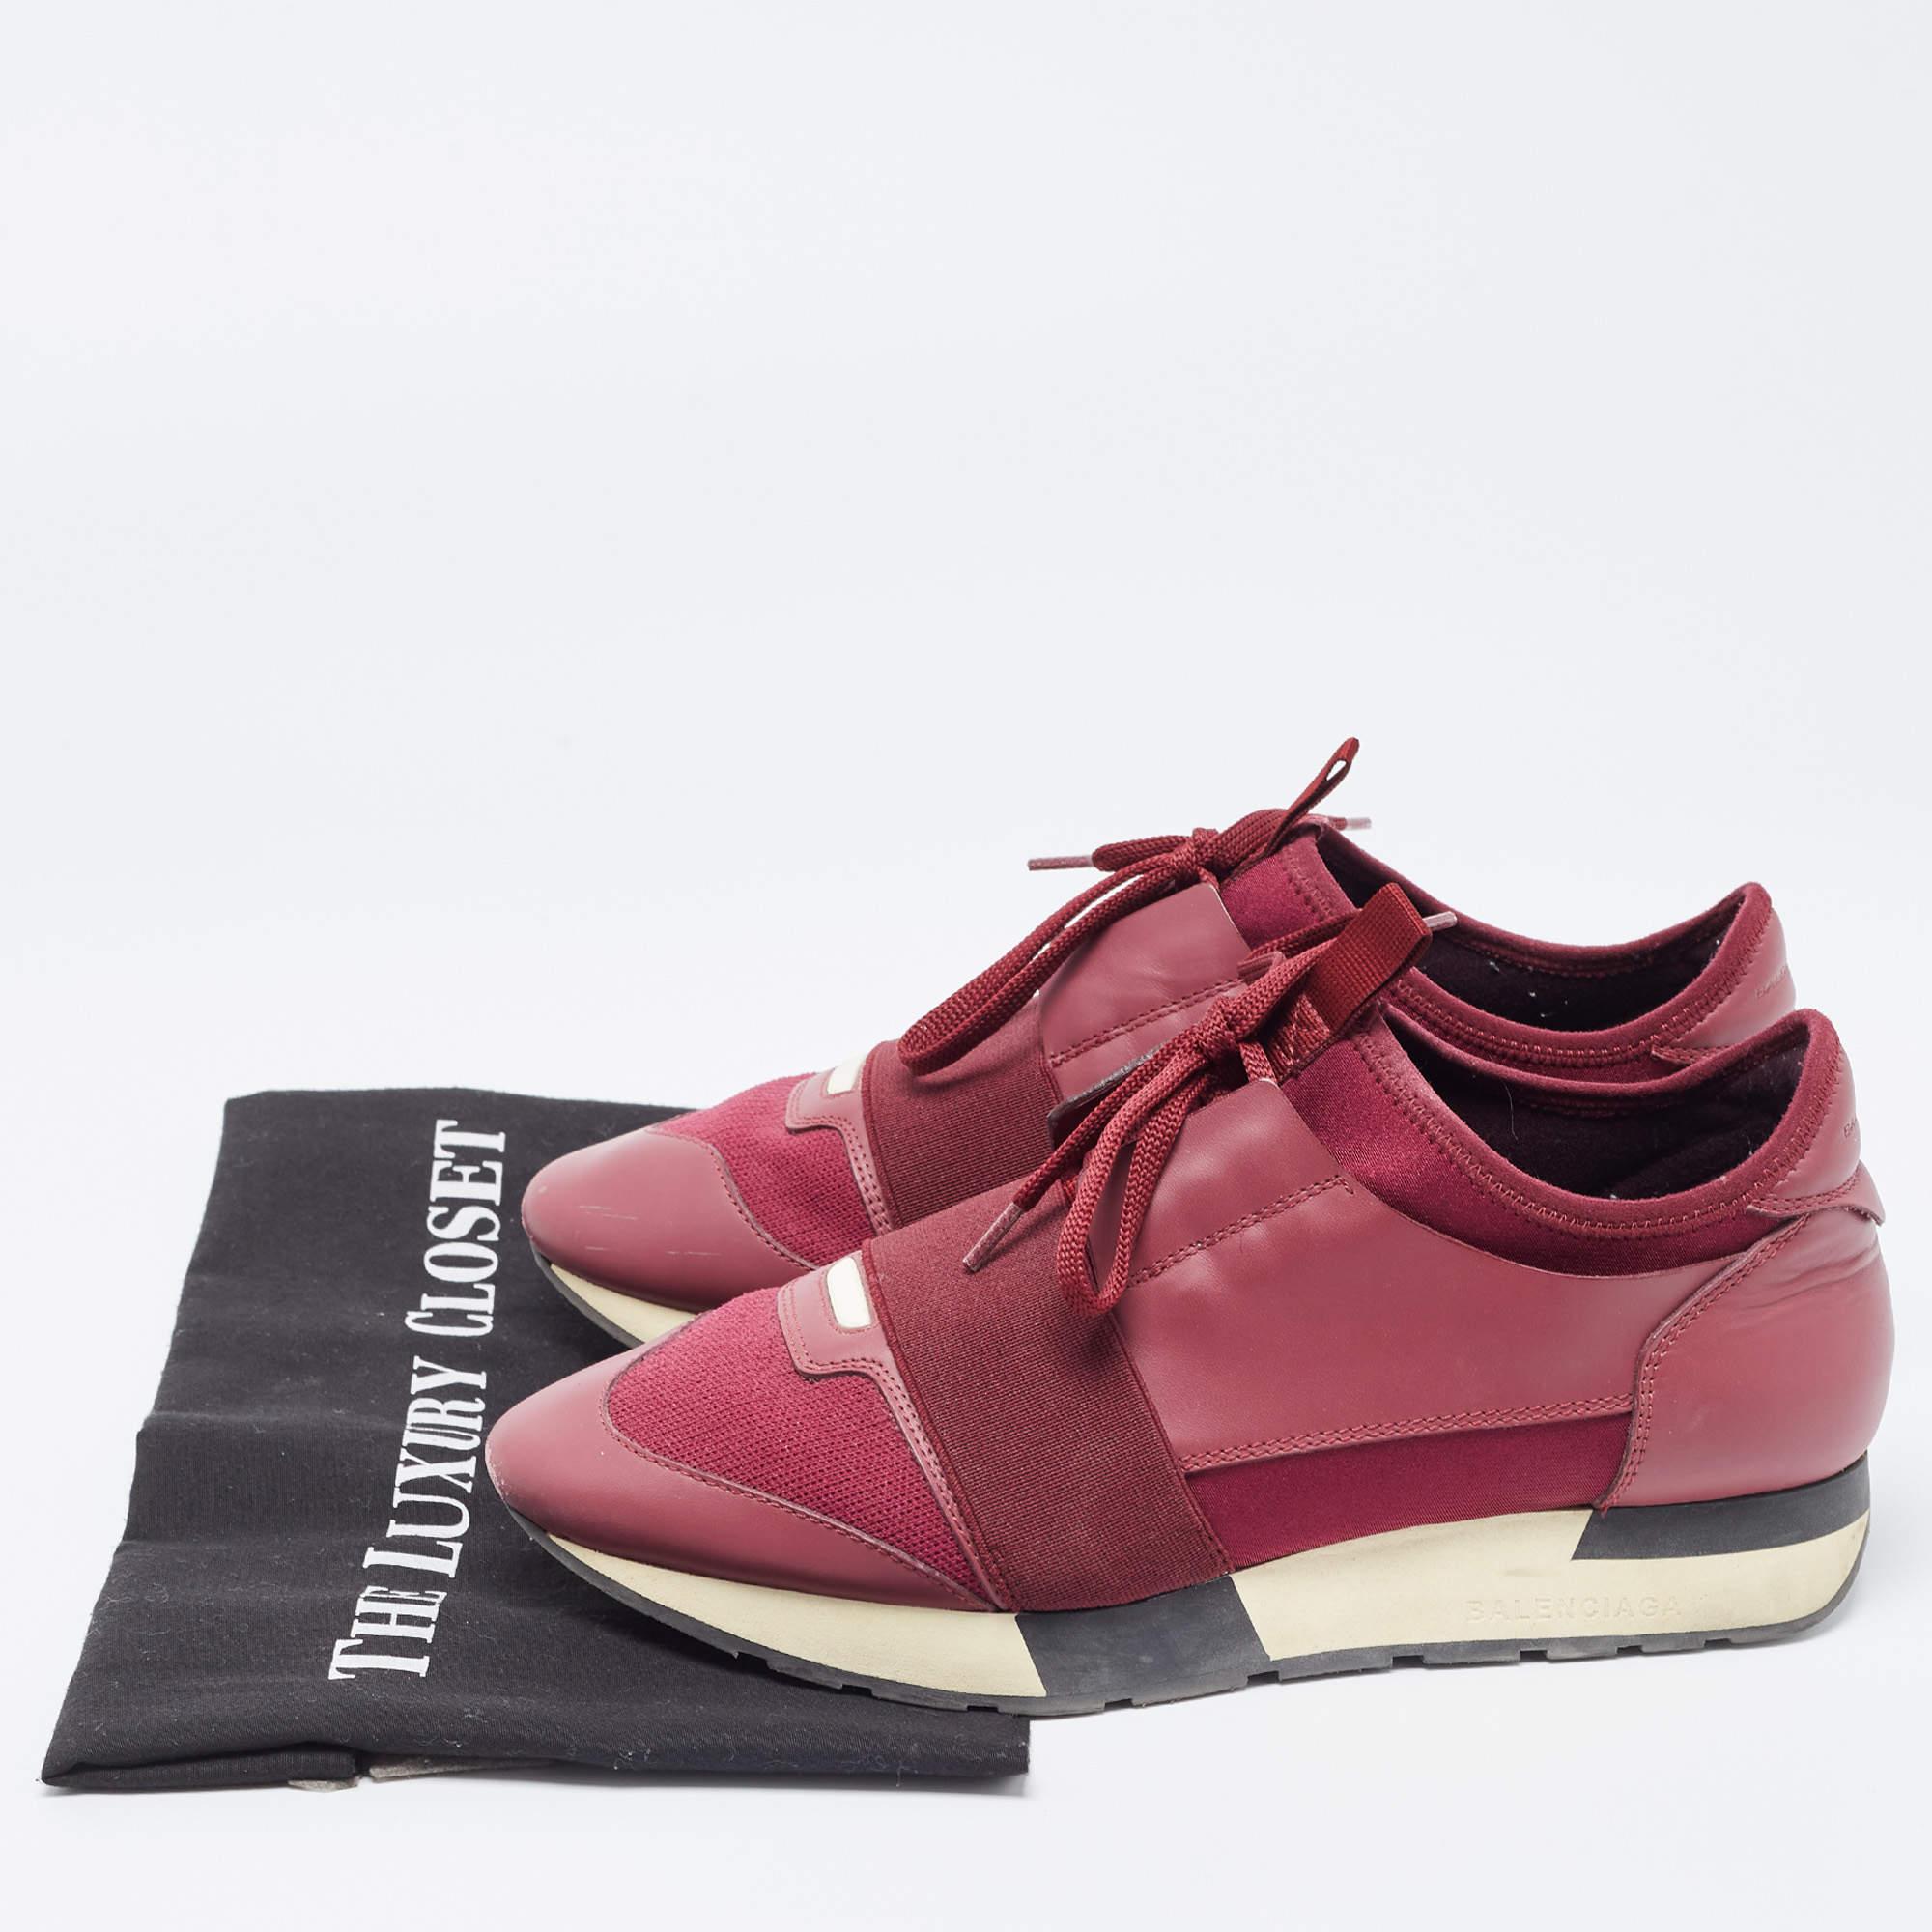 Balenciaga Burgundy Leather and Fabric Race Runner Sneakers Size 39 4